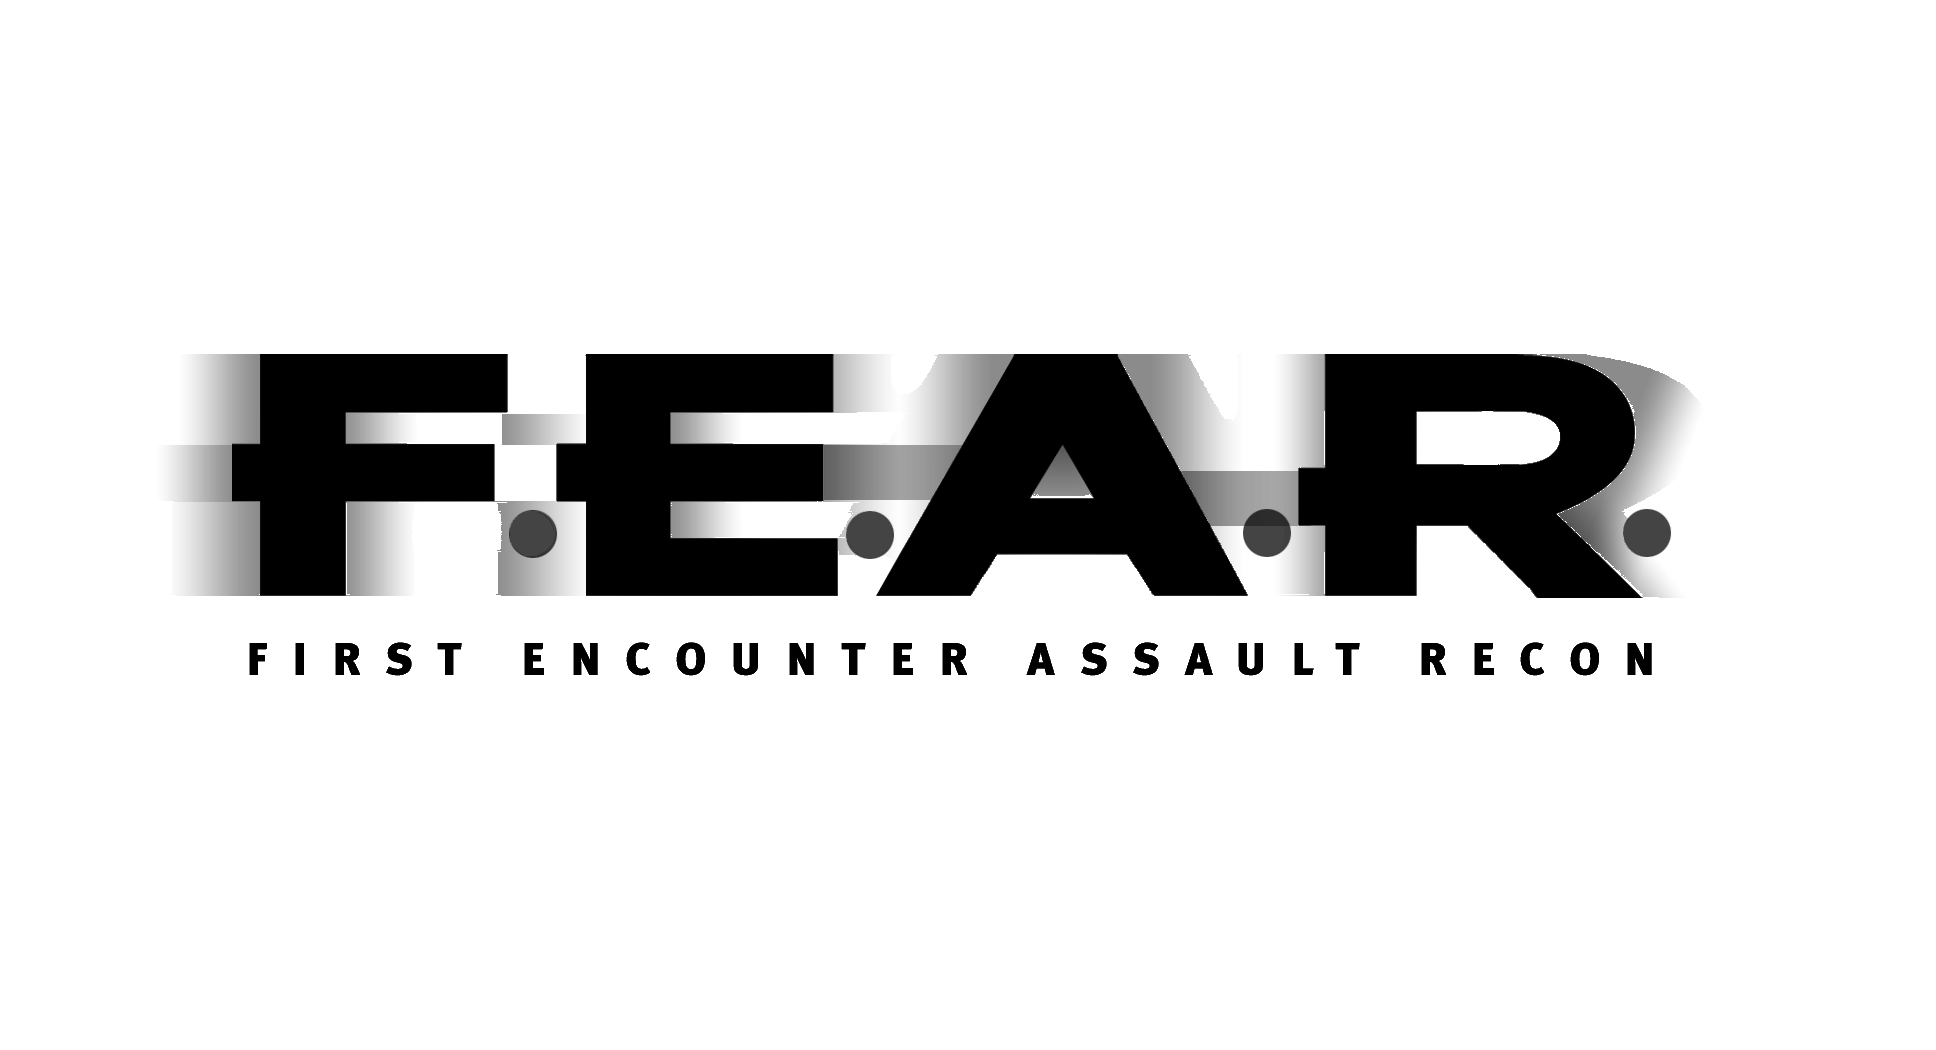 F.E.A.R. Returns, Monolith Does Not